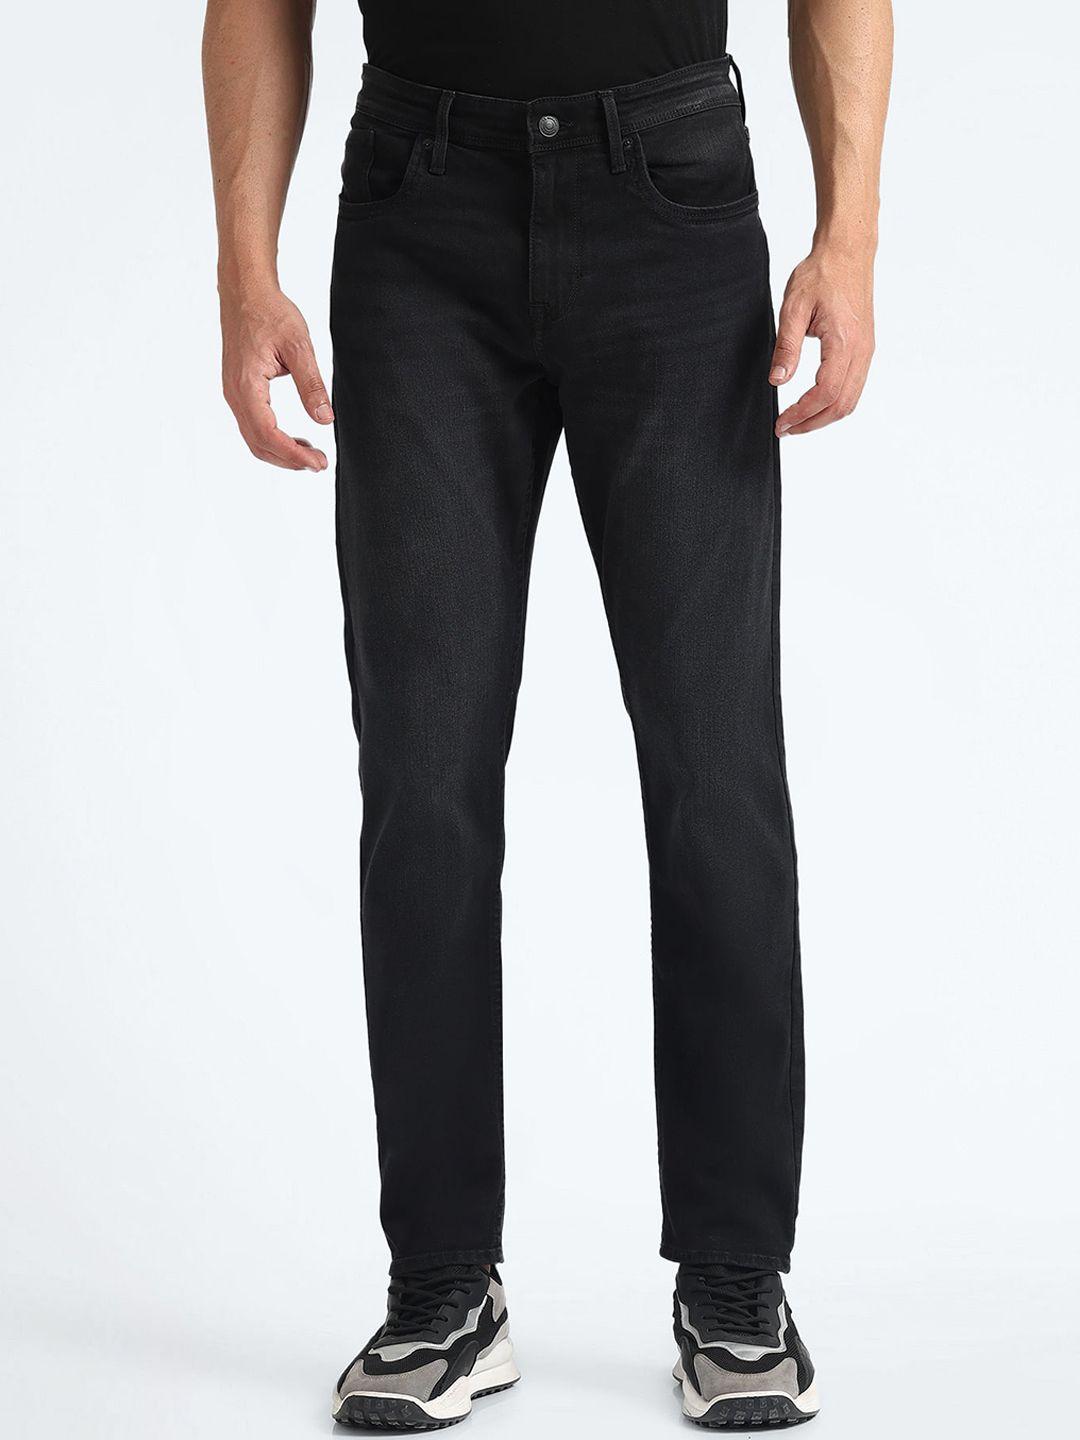 flying-machine-men-tapered-fit-stretchable-jeans